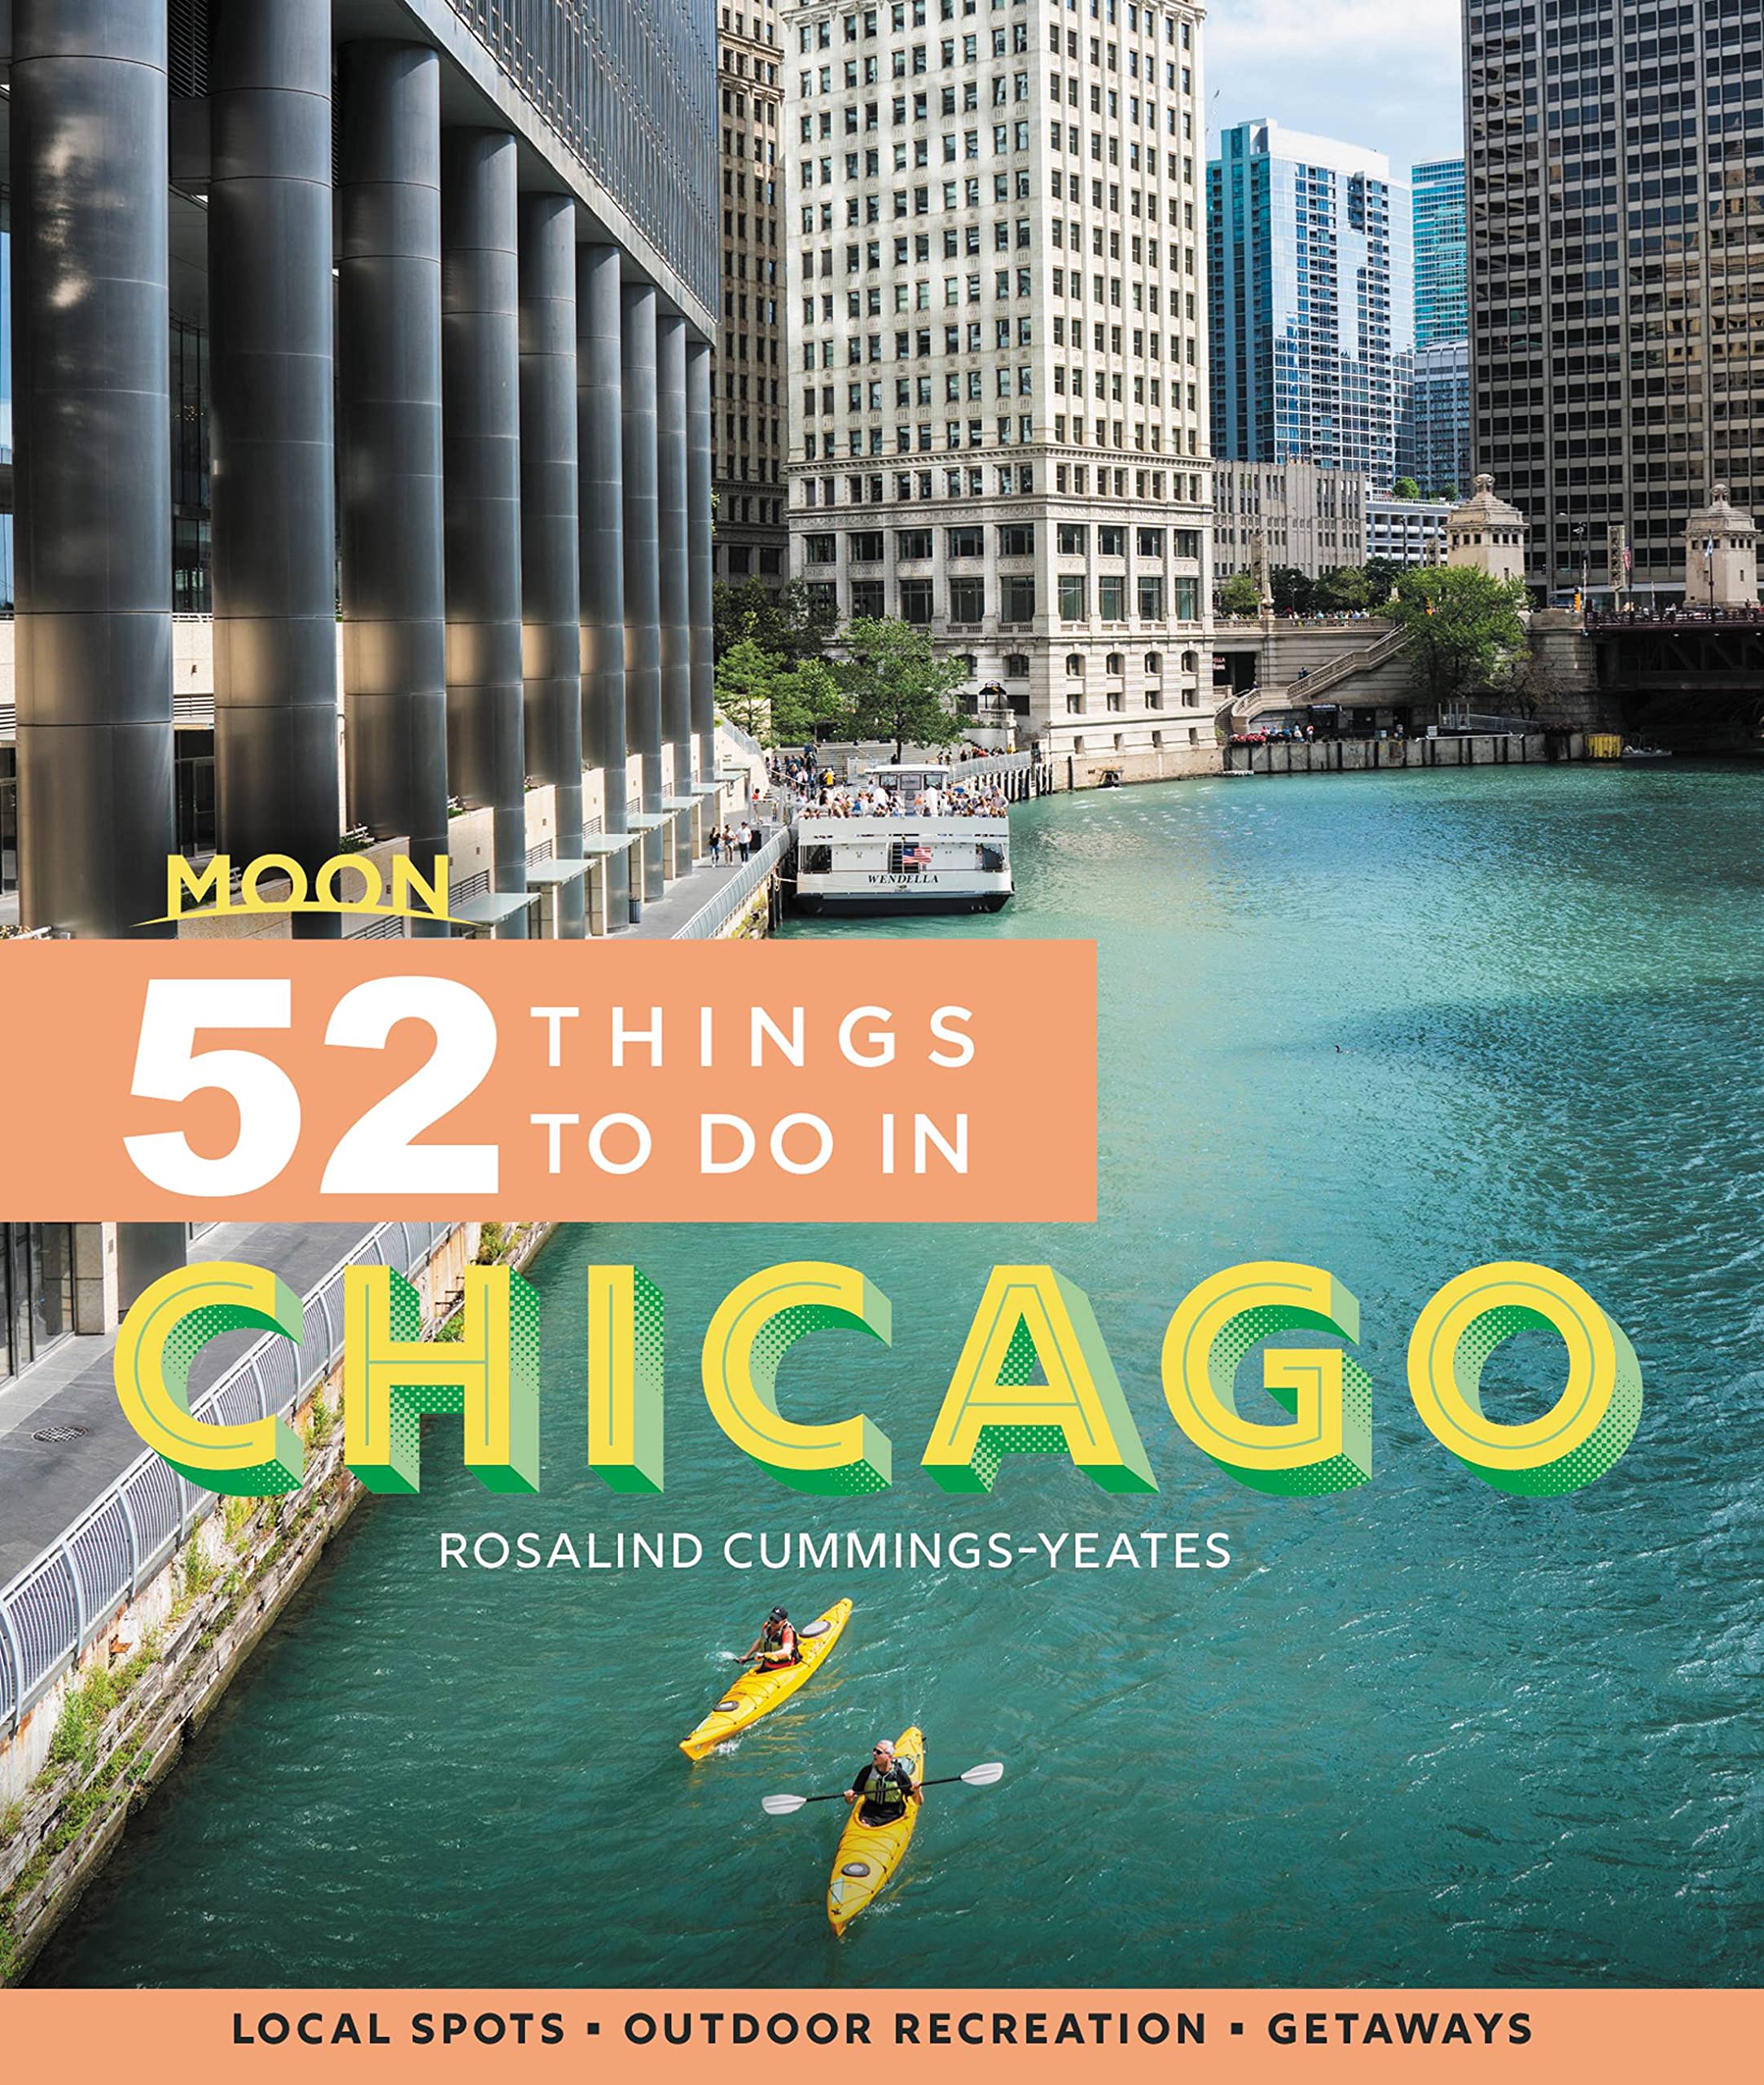 Moon: 52 Things to Do in Chicago